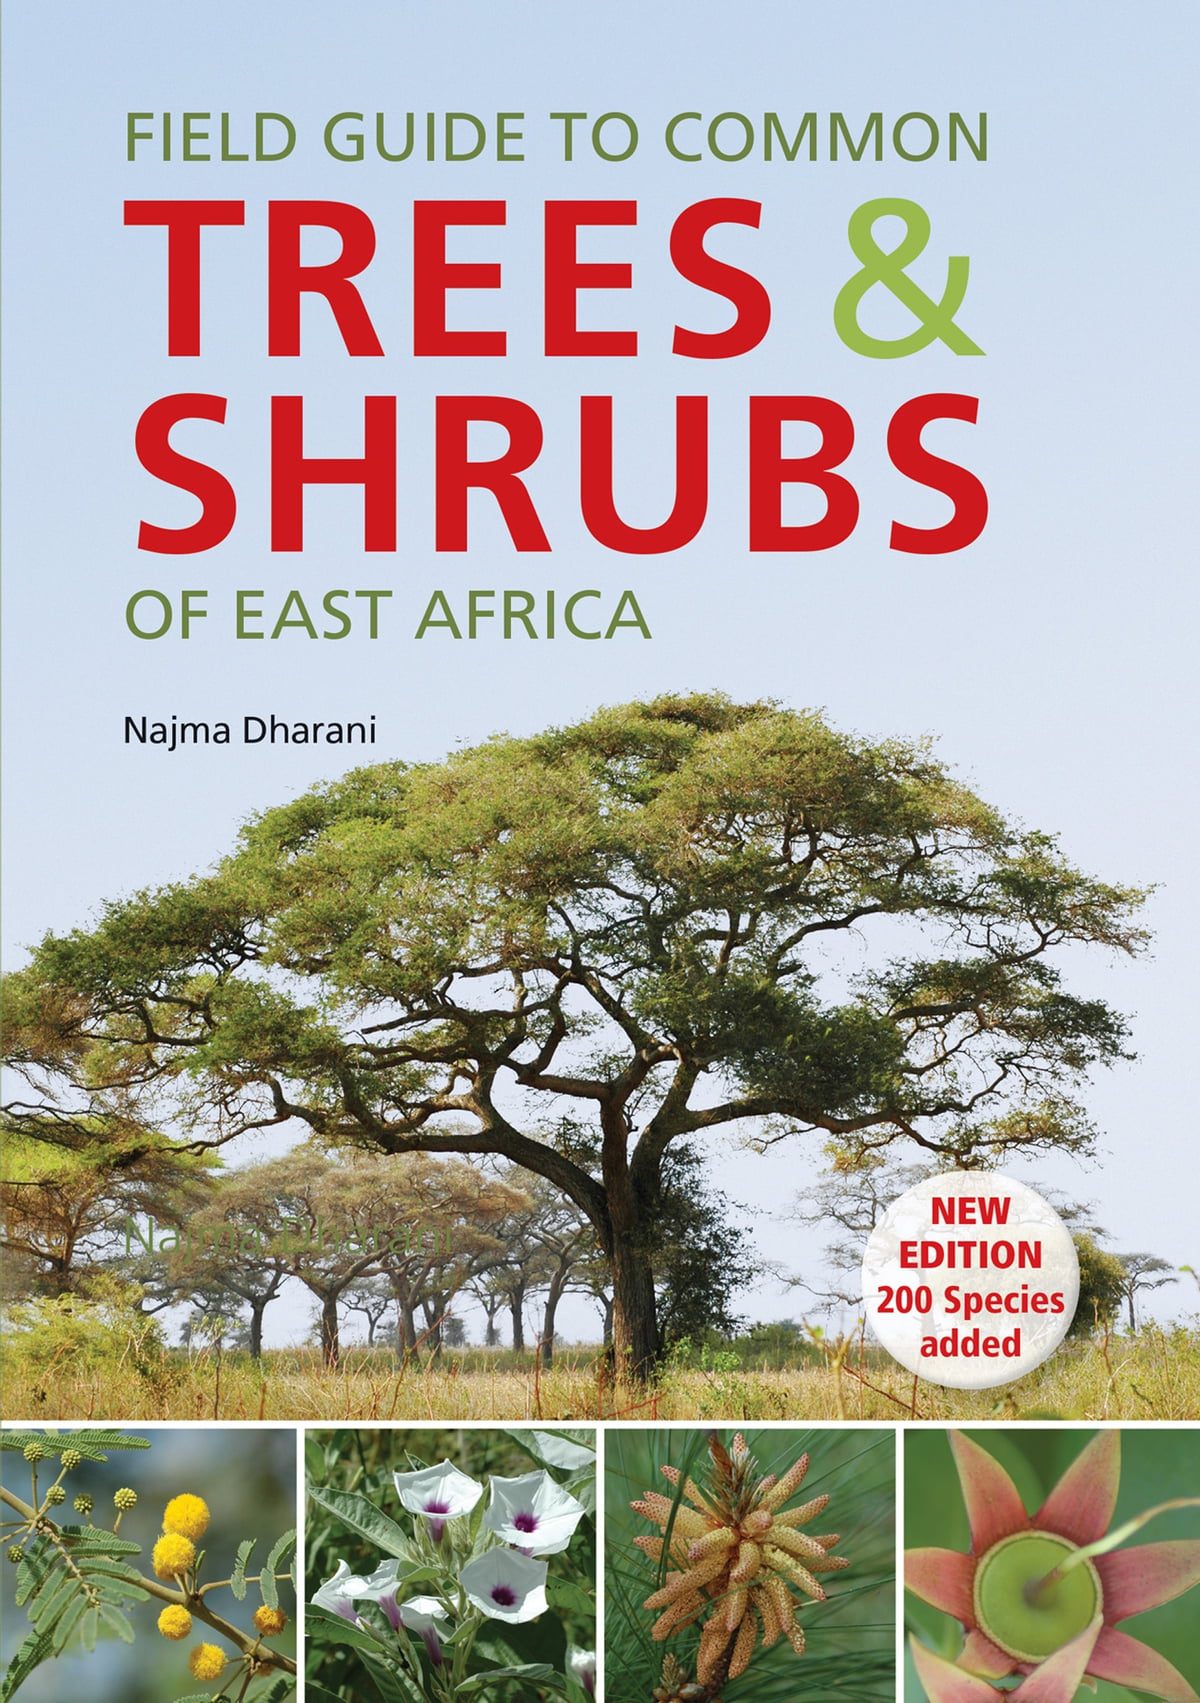 Field Guide to Common Trees and Shrubs of East Africa by Najma Dharani nuriakenya